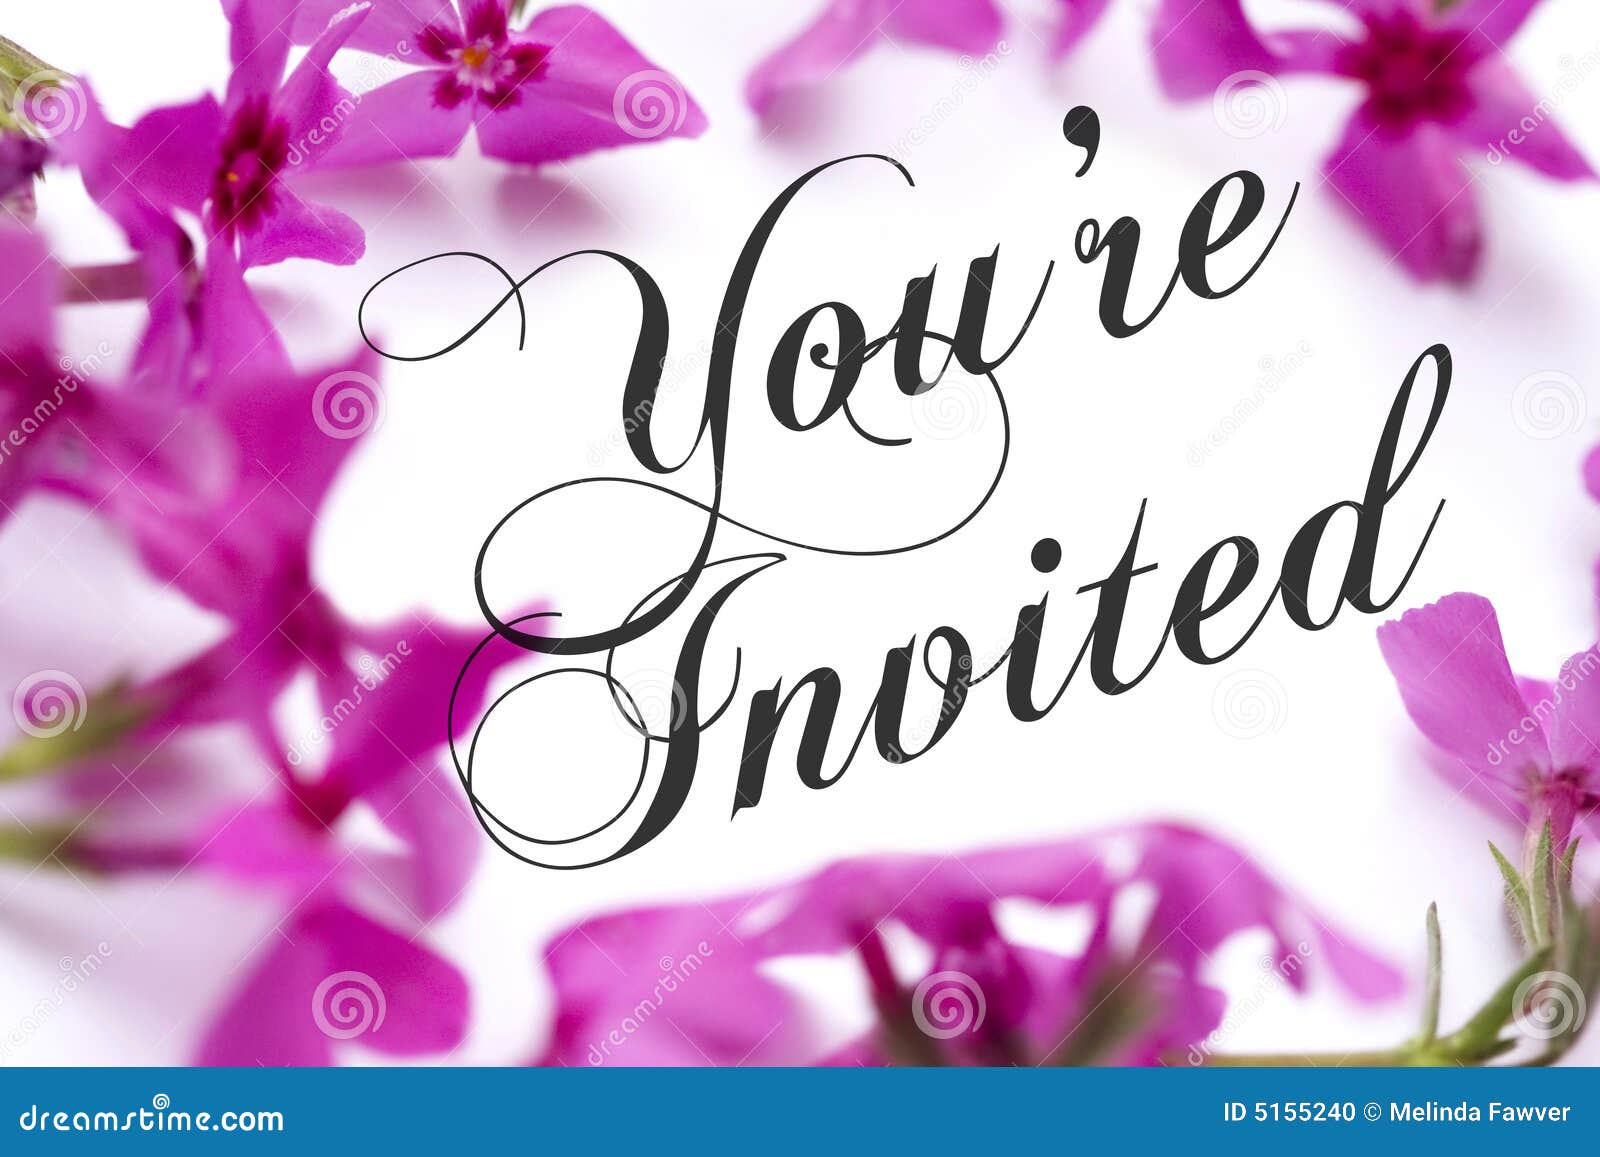 you are invited clipart - photo #48